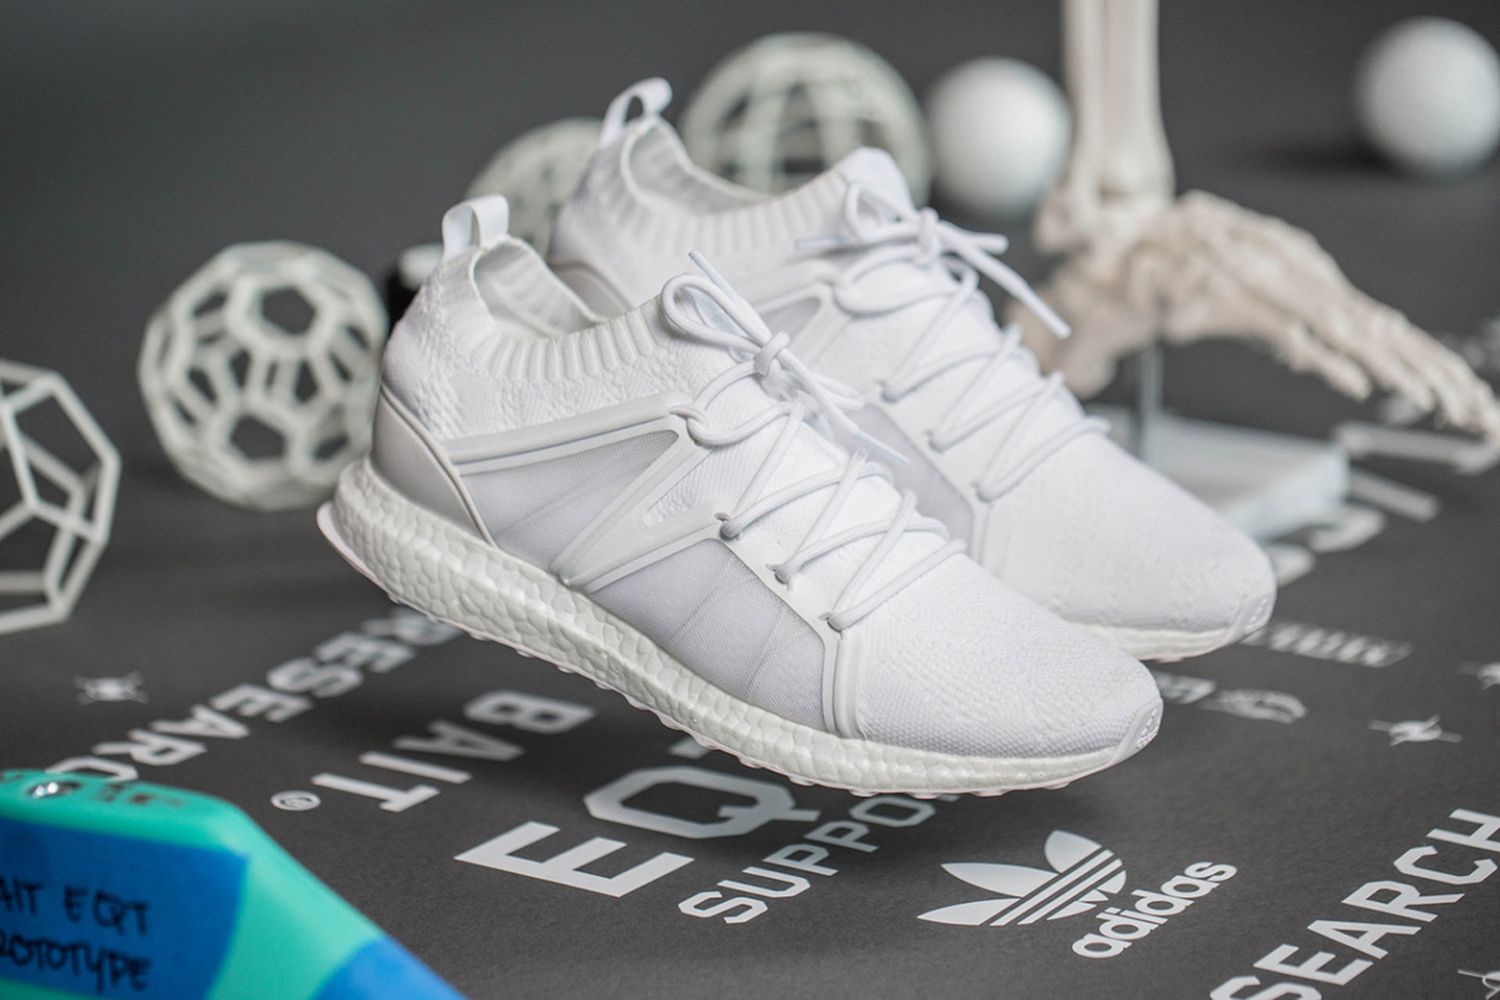 EQT Support 93/16 "R&D" Pack